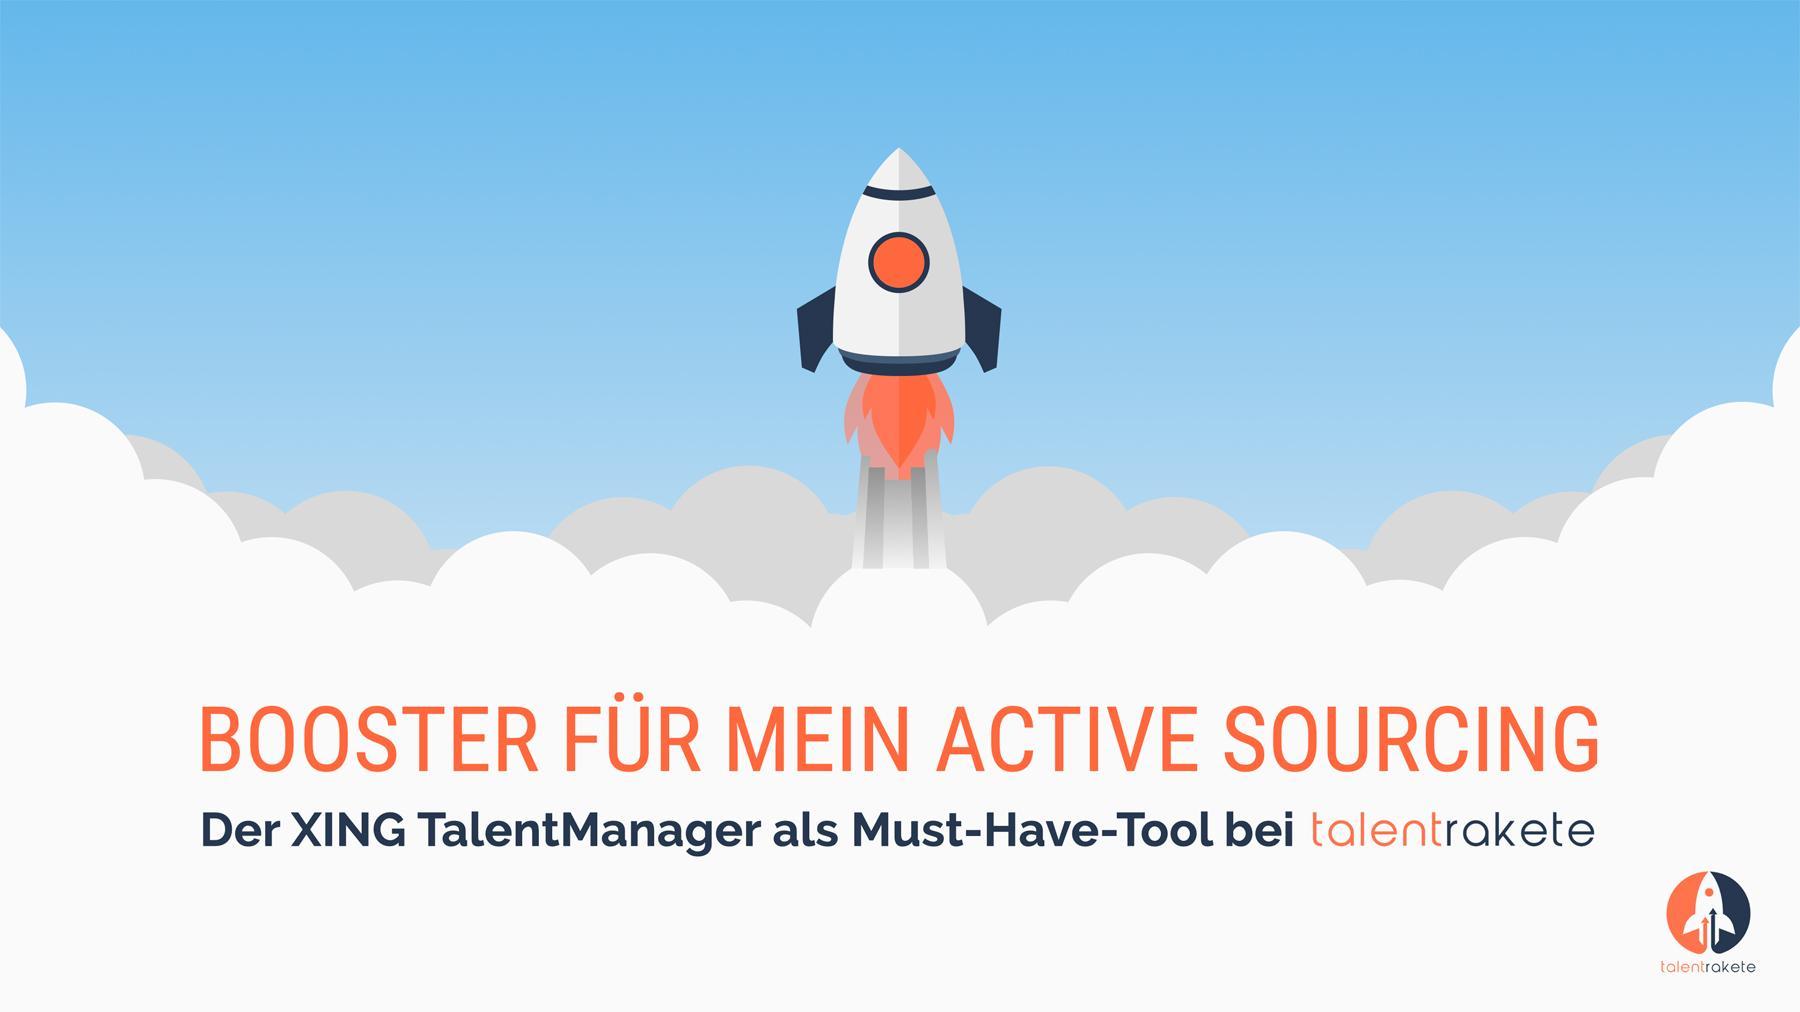 XING-TalentManager-als-Active-Sourcing-Booster